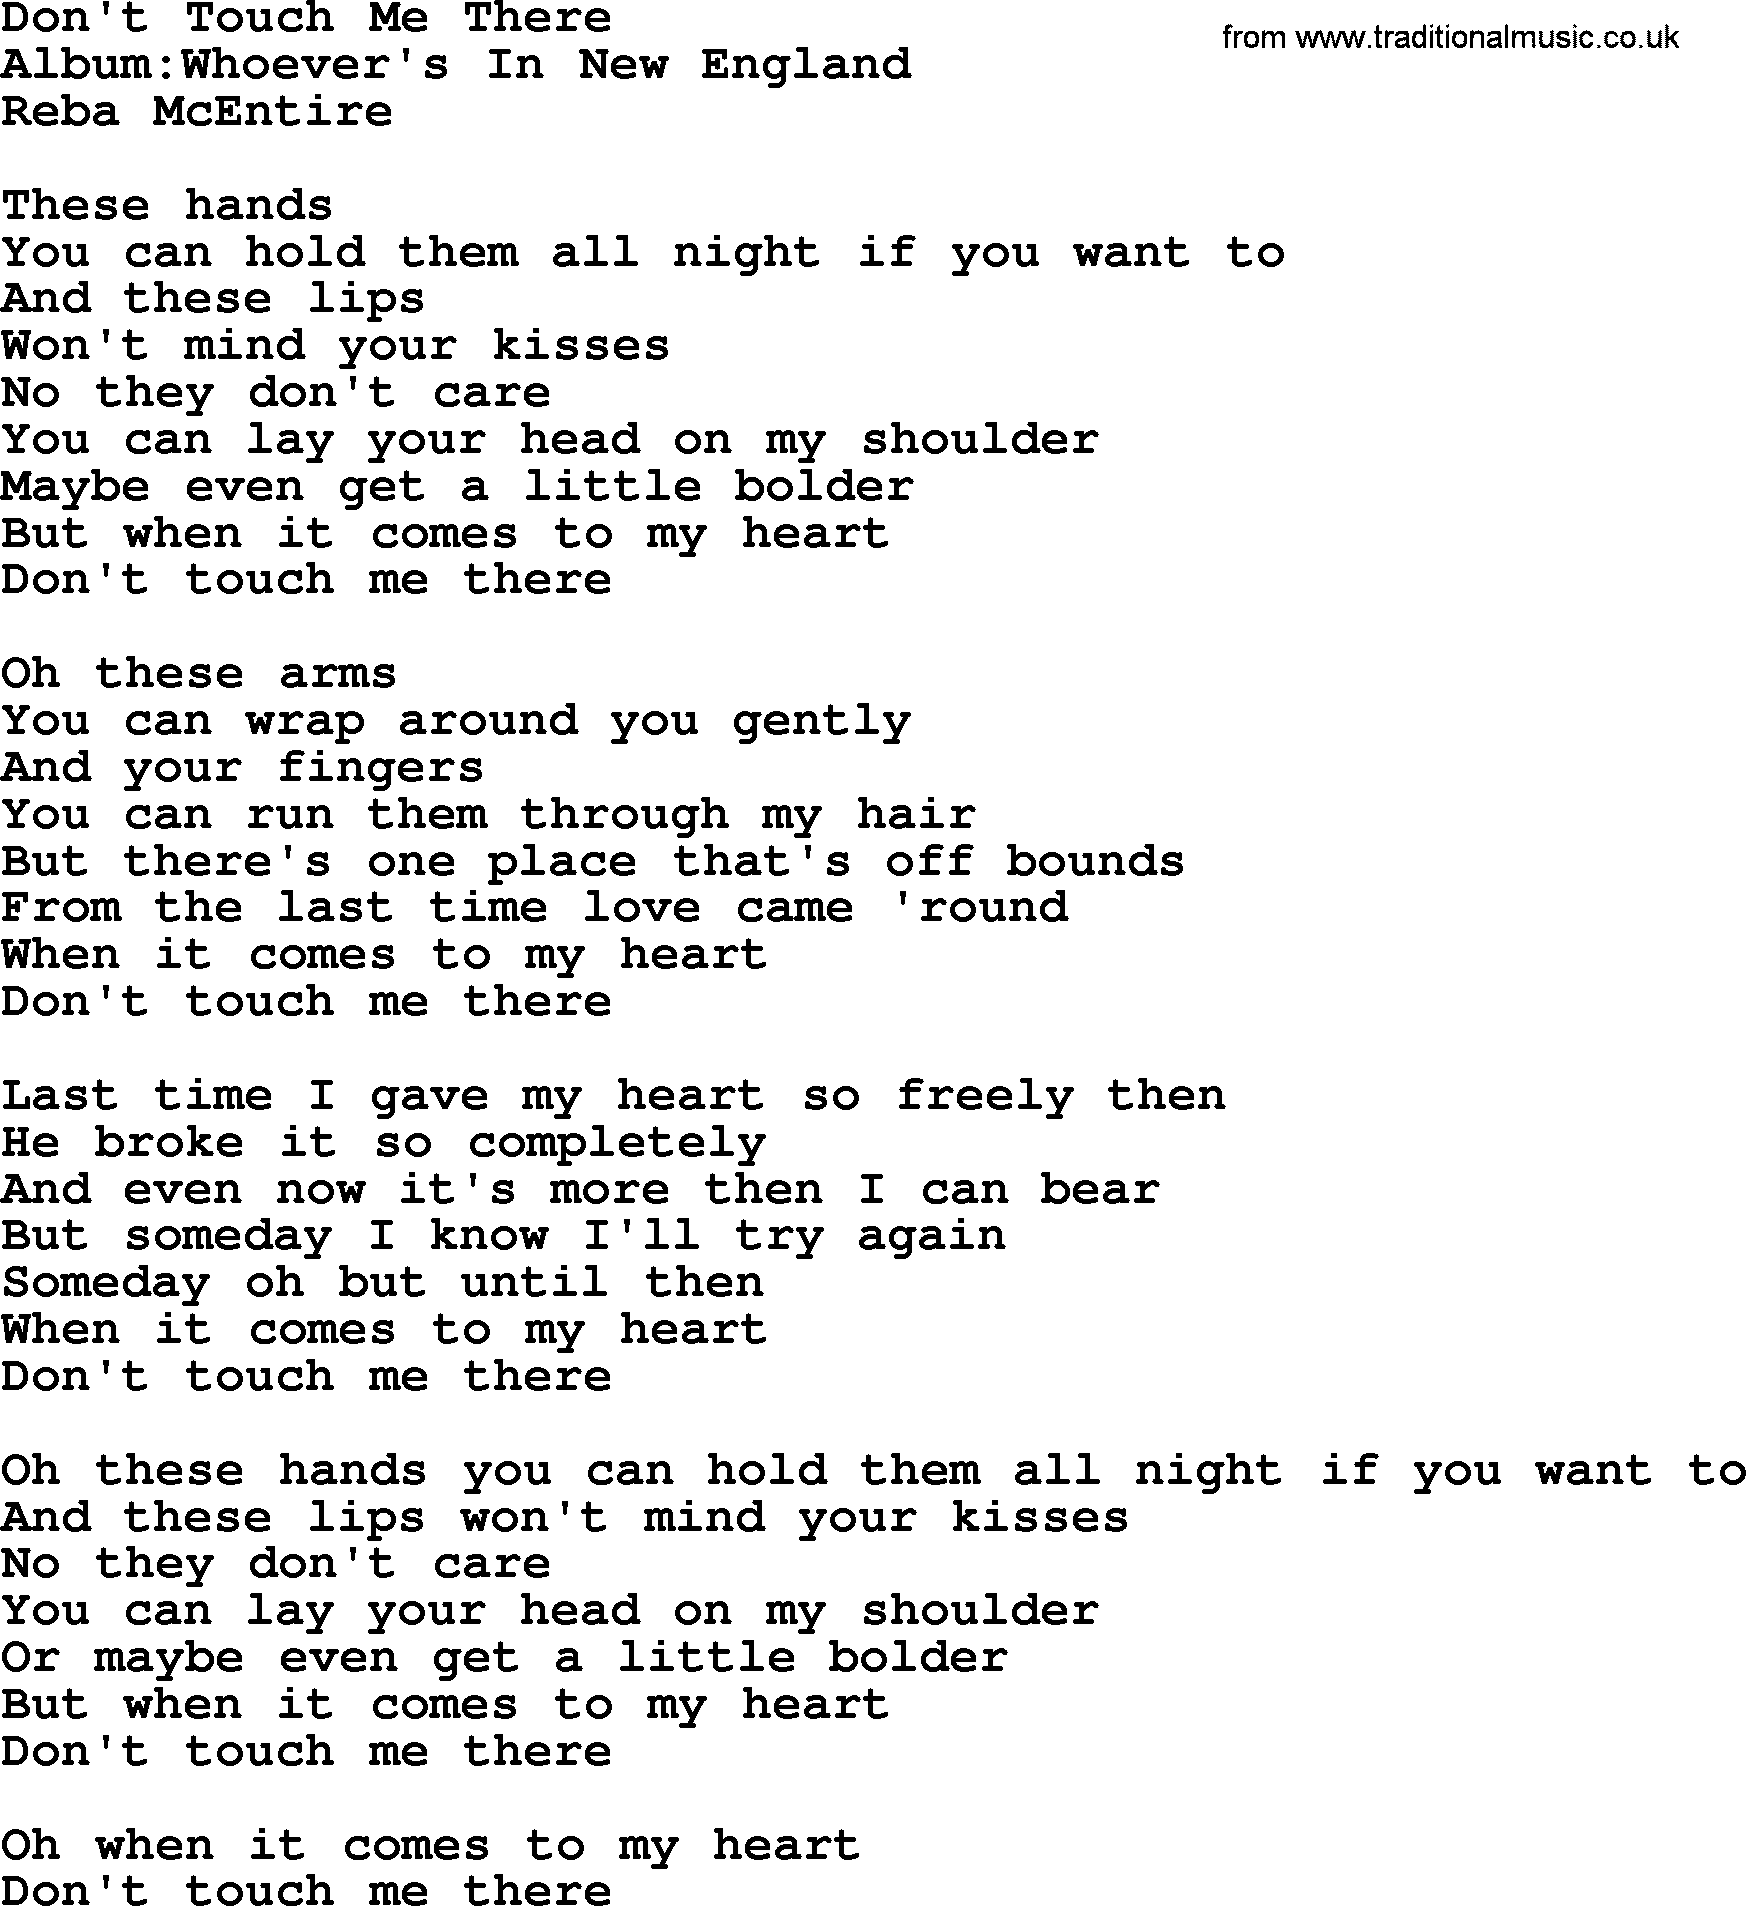 Reba McEntire song: Don't Touch Me There lyrics